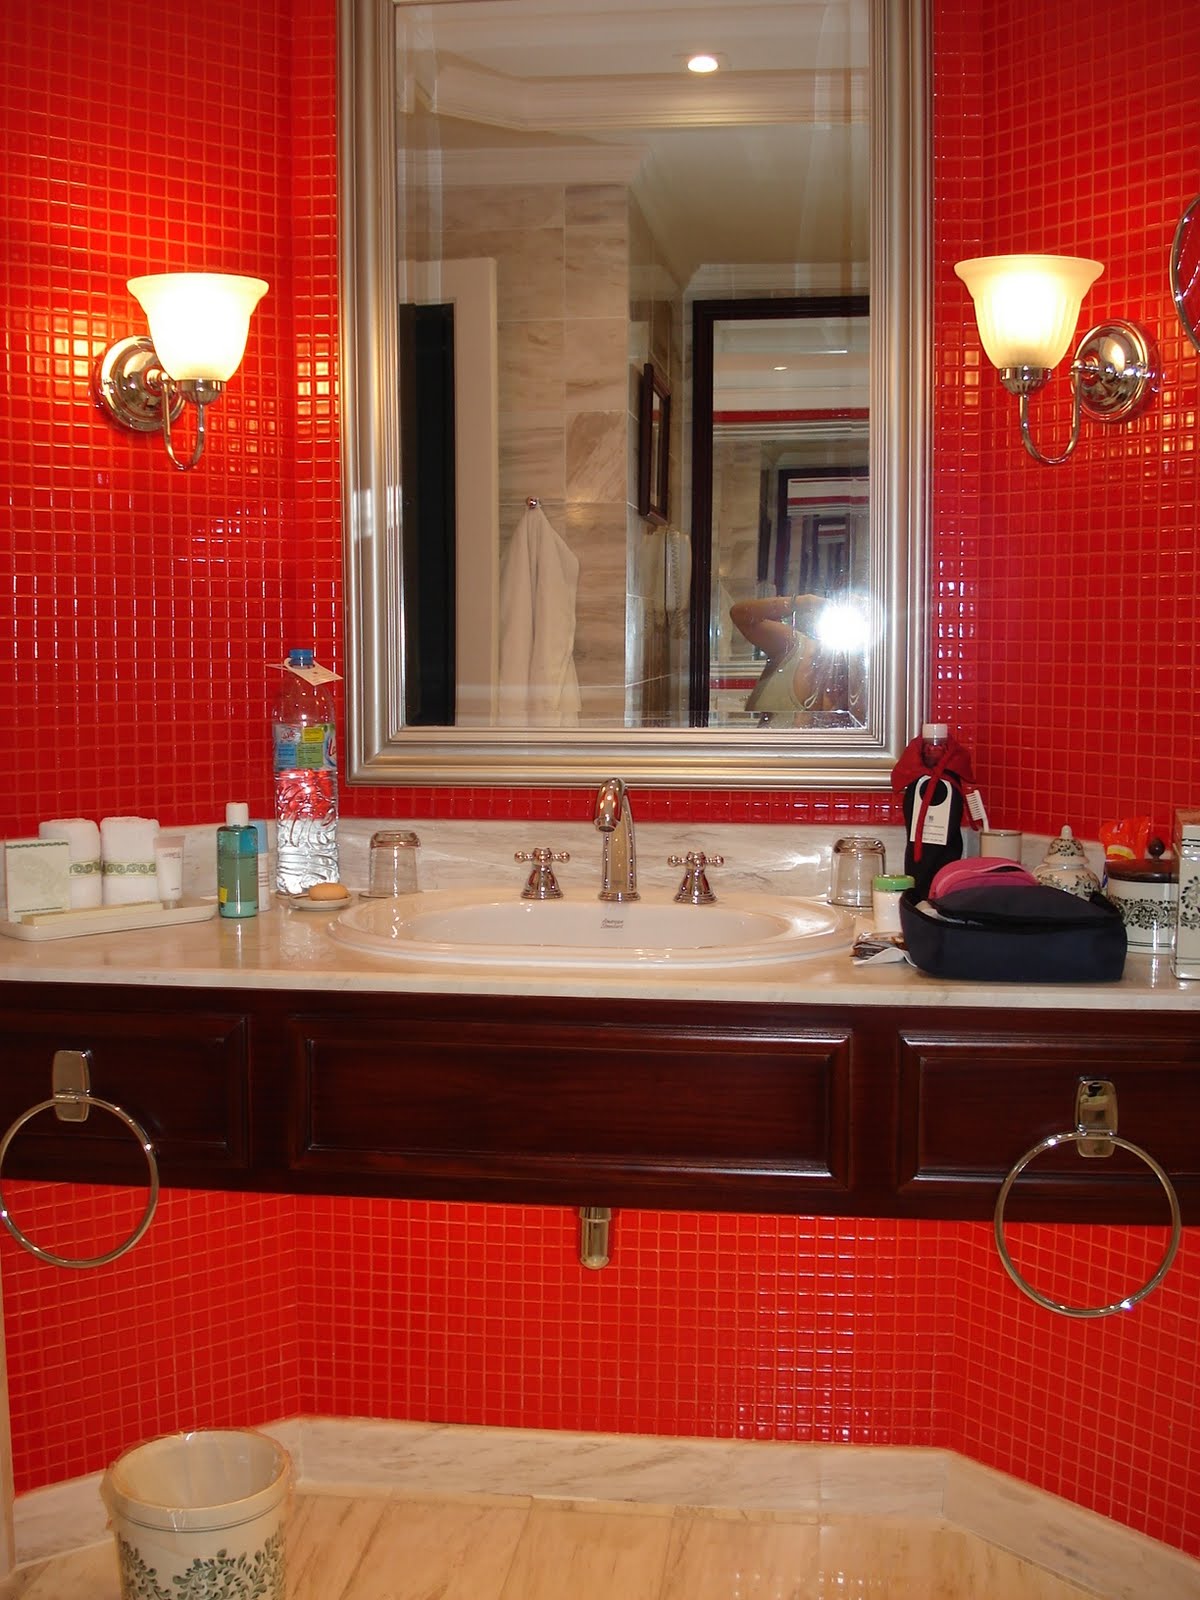 bathroom ideas white  white marble. The color scheme of red, black and white is the same for